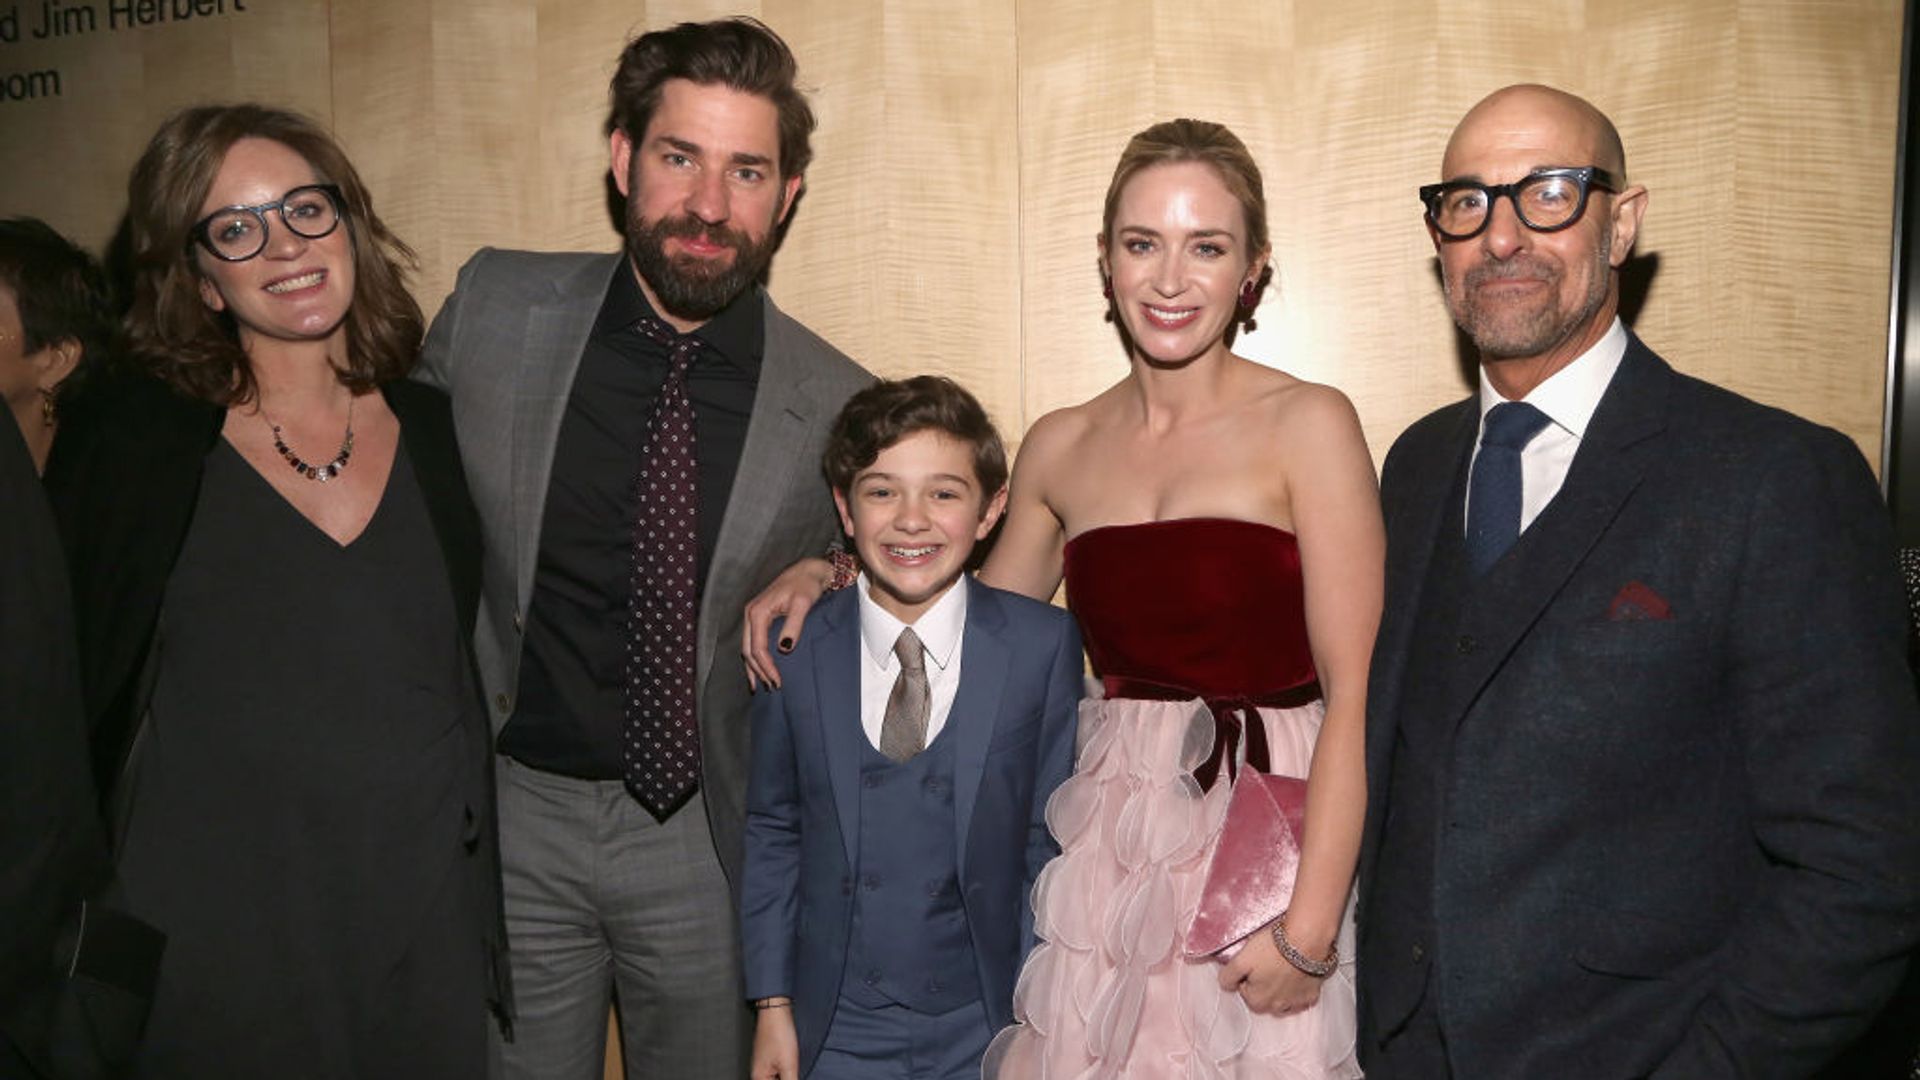 Stanley Tucci with Emily Blunt, John Krasinski and Felicity Blunt at the premiere of A Quiet Place